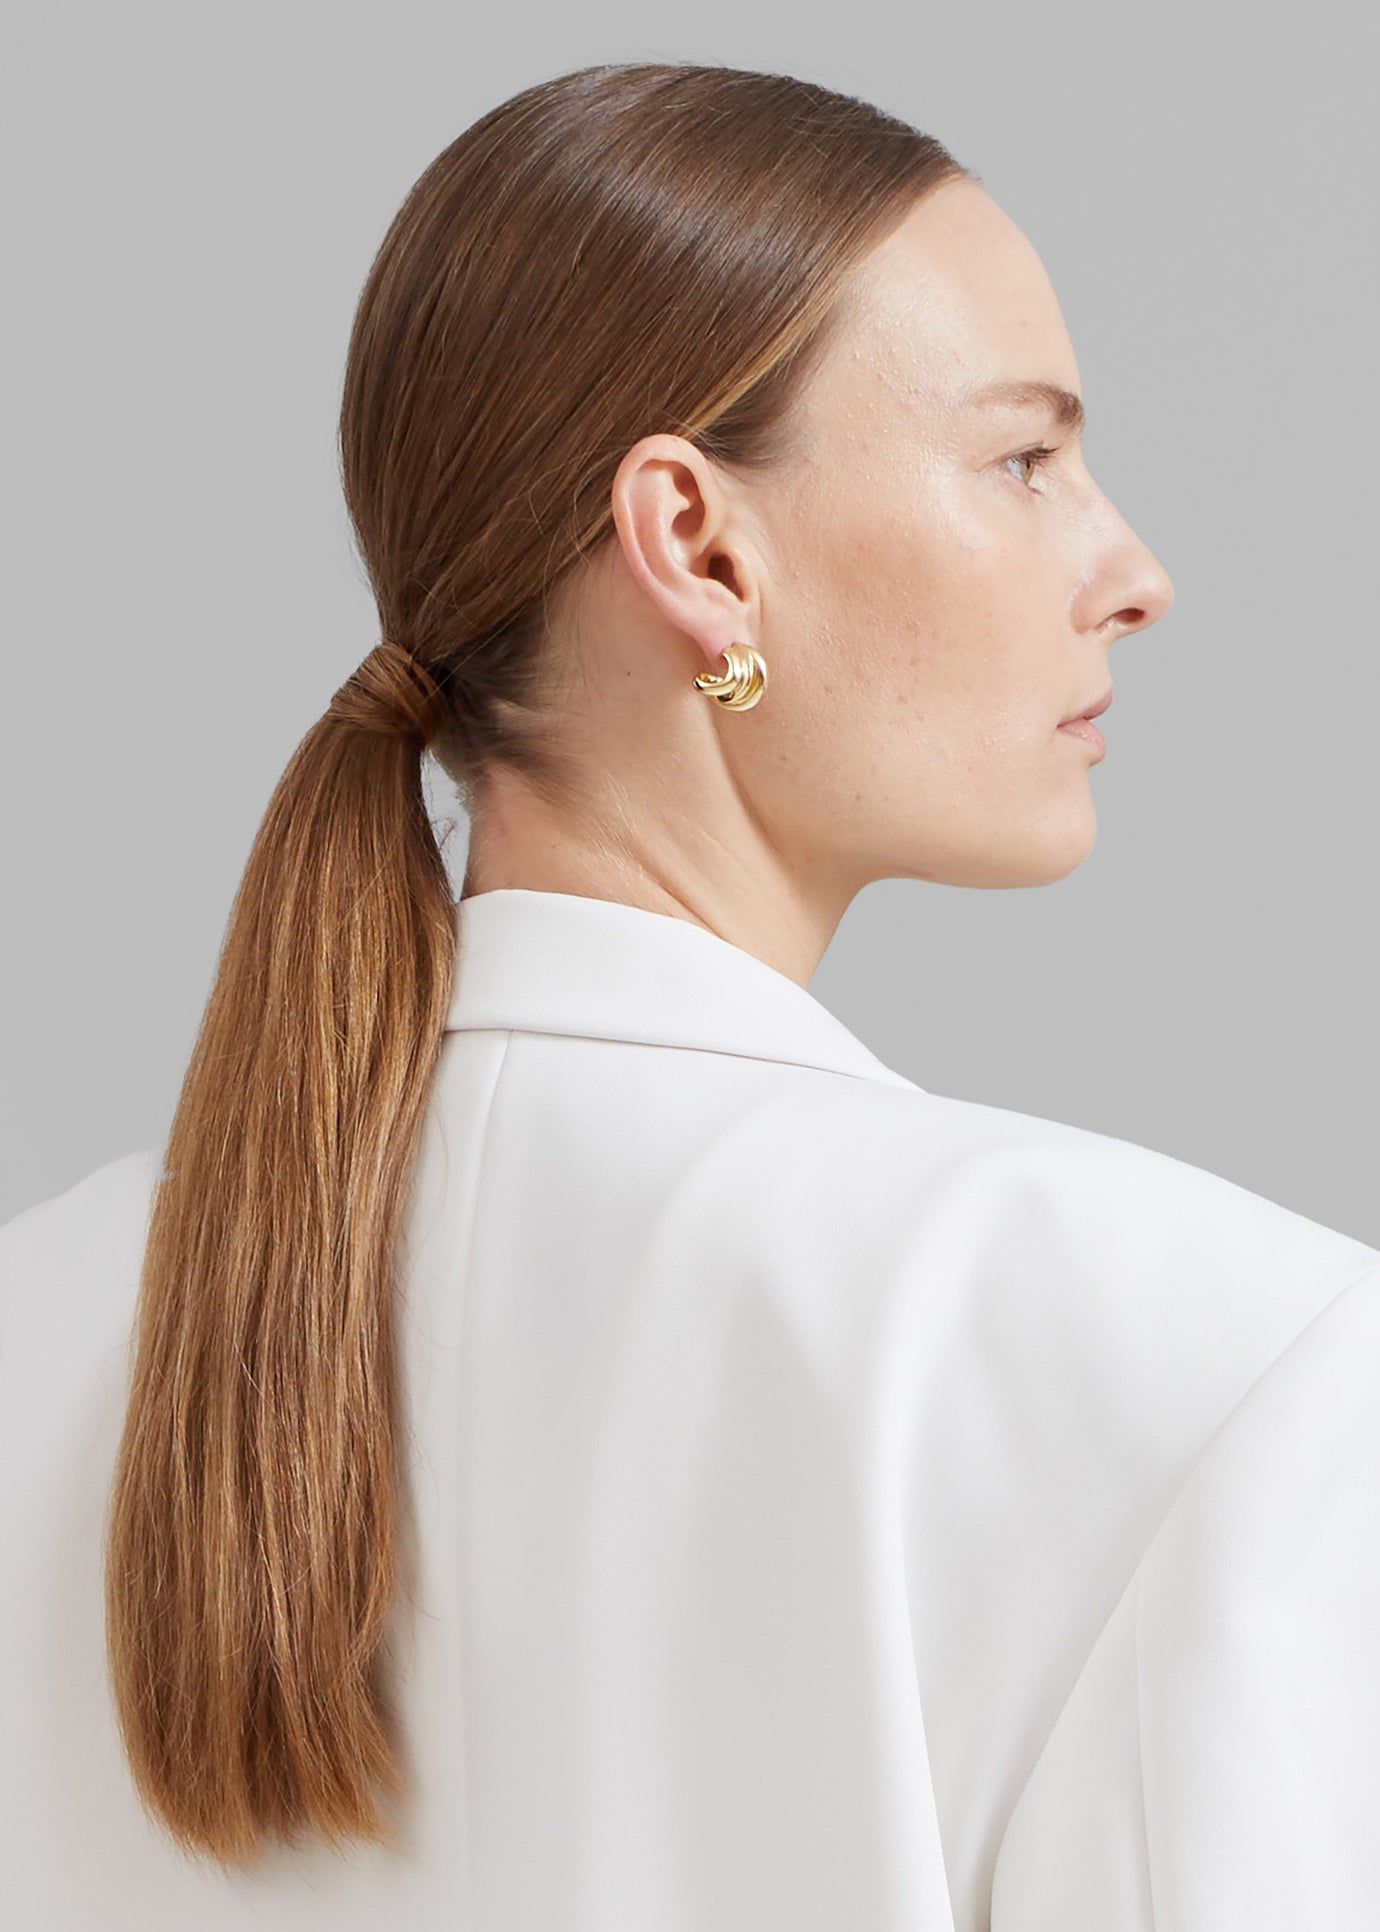 Completedworks The Comeback Kid Earrings - Gold